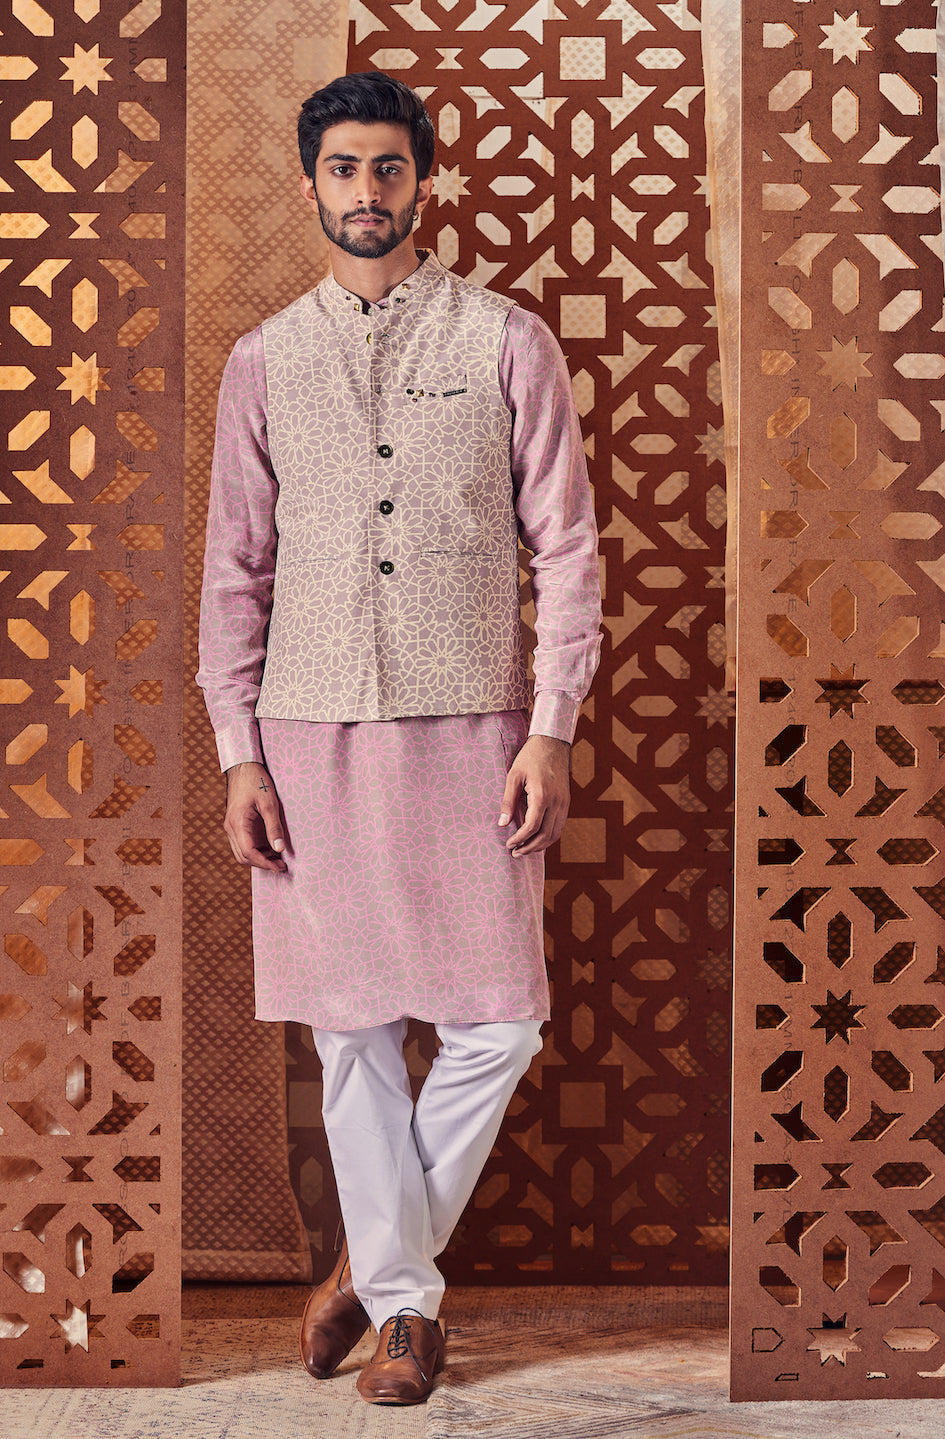 Men's Printed Nehru Jacket at Kamakhyaa by Charkhee. This item is Beige, Cotton, Crepe, Embroidered, Ethnic Wear, Indian Wear, Indianwear Jackets, Jackets, Mens Overlay, Menswear, Naayaab, Natural, Nayaab, Nehru Jacket, Relaxed Fit